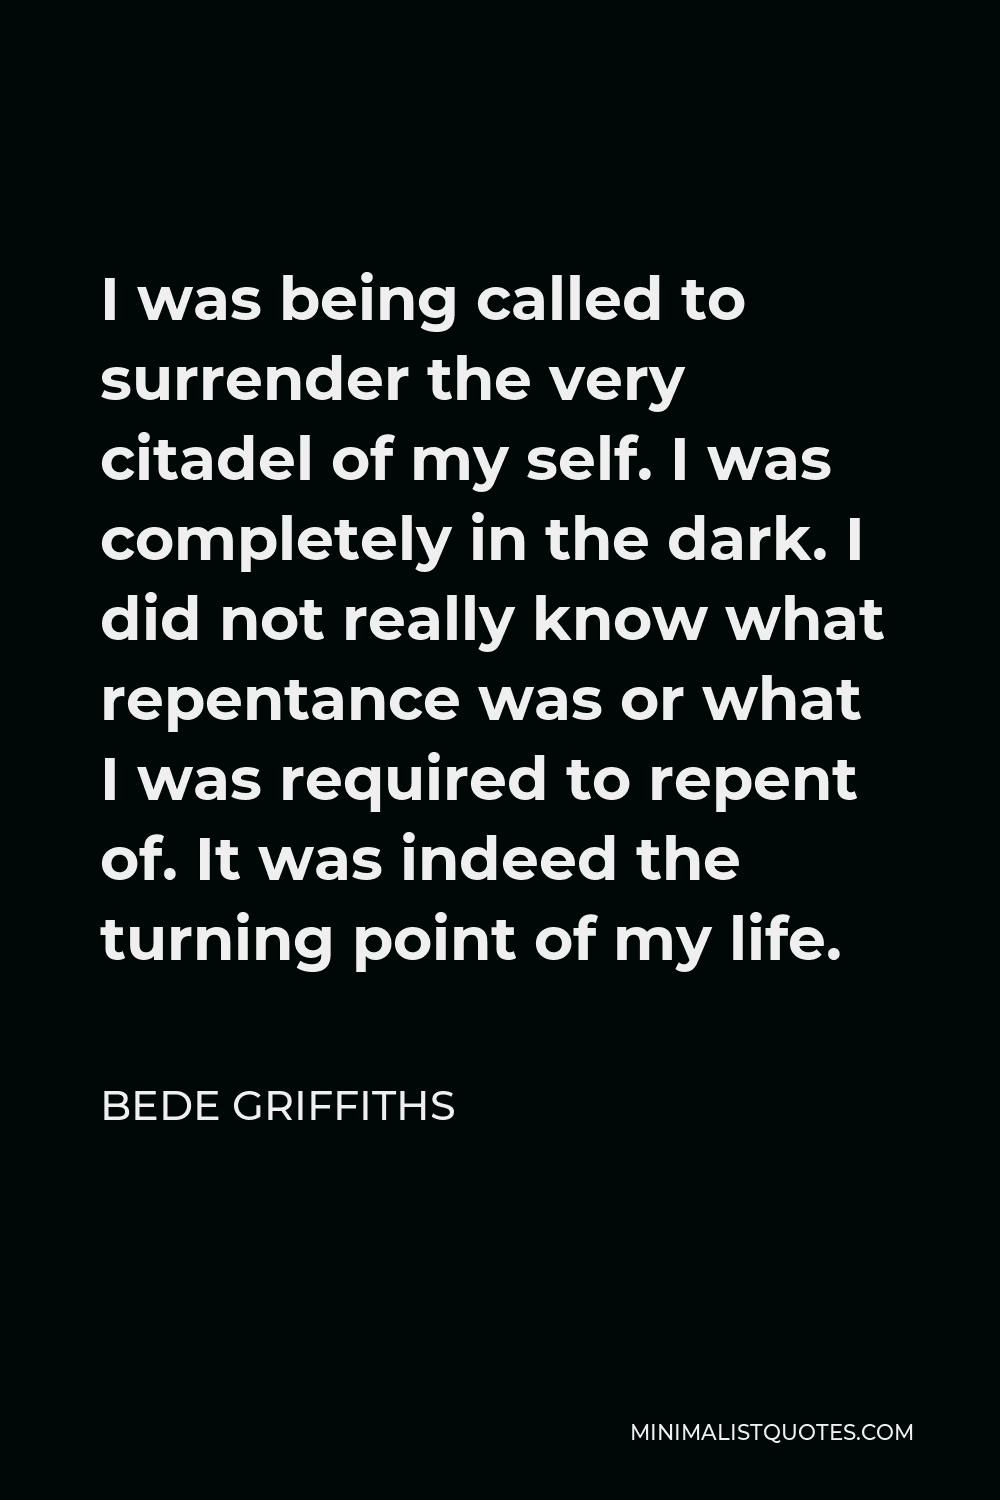 Bede Griffiths Quote - I was being called to surrender the very citadel of my self. I was completely in the dark. I did not really know what repentance was or what I was required to repent of. It was indeed the turning point of my life.